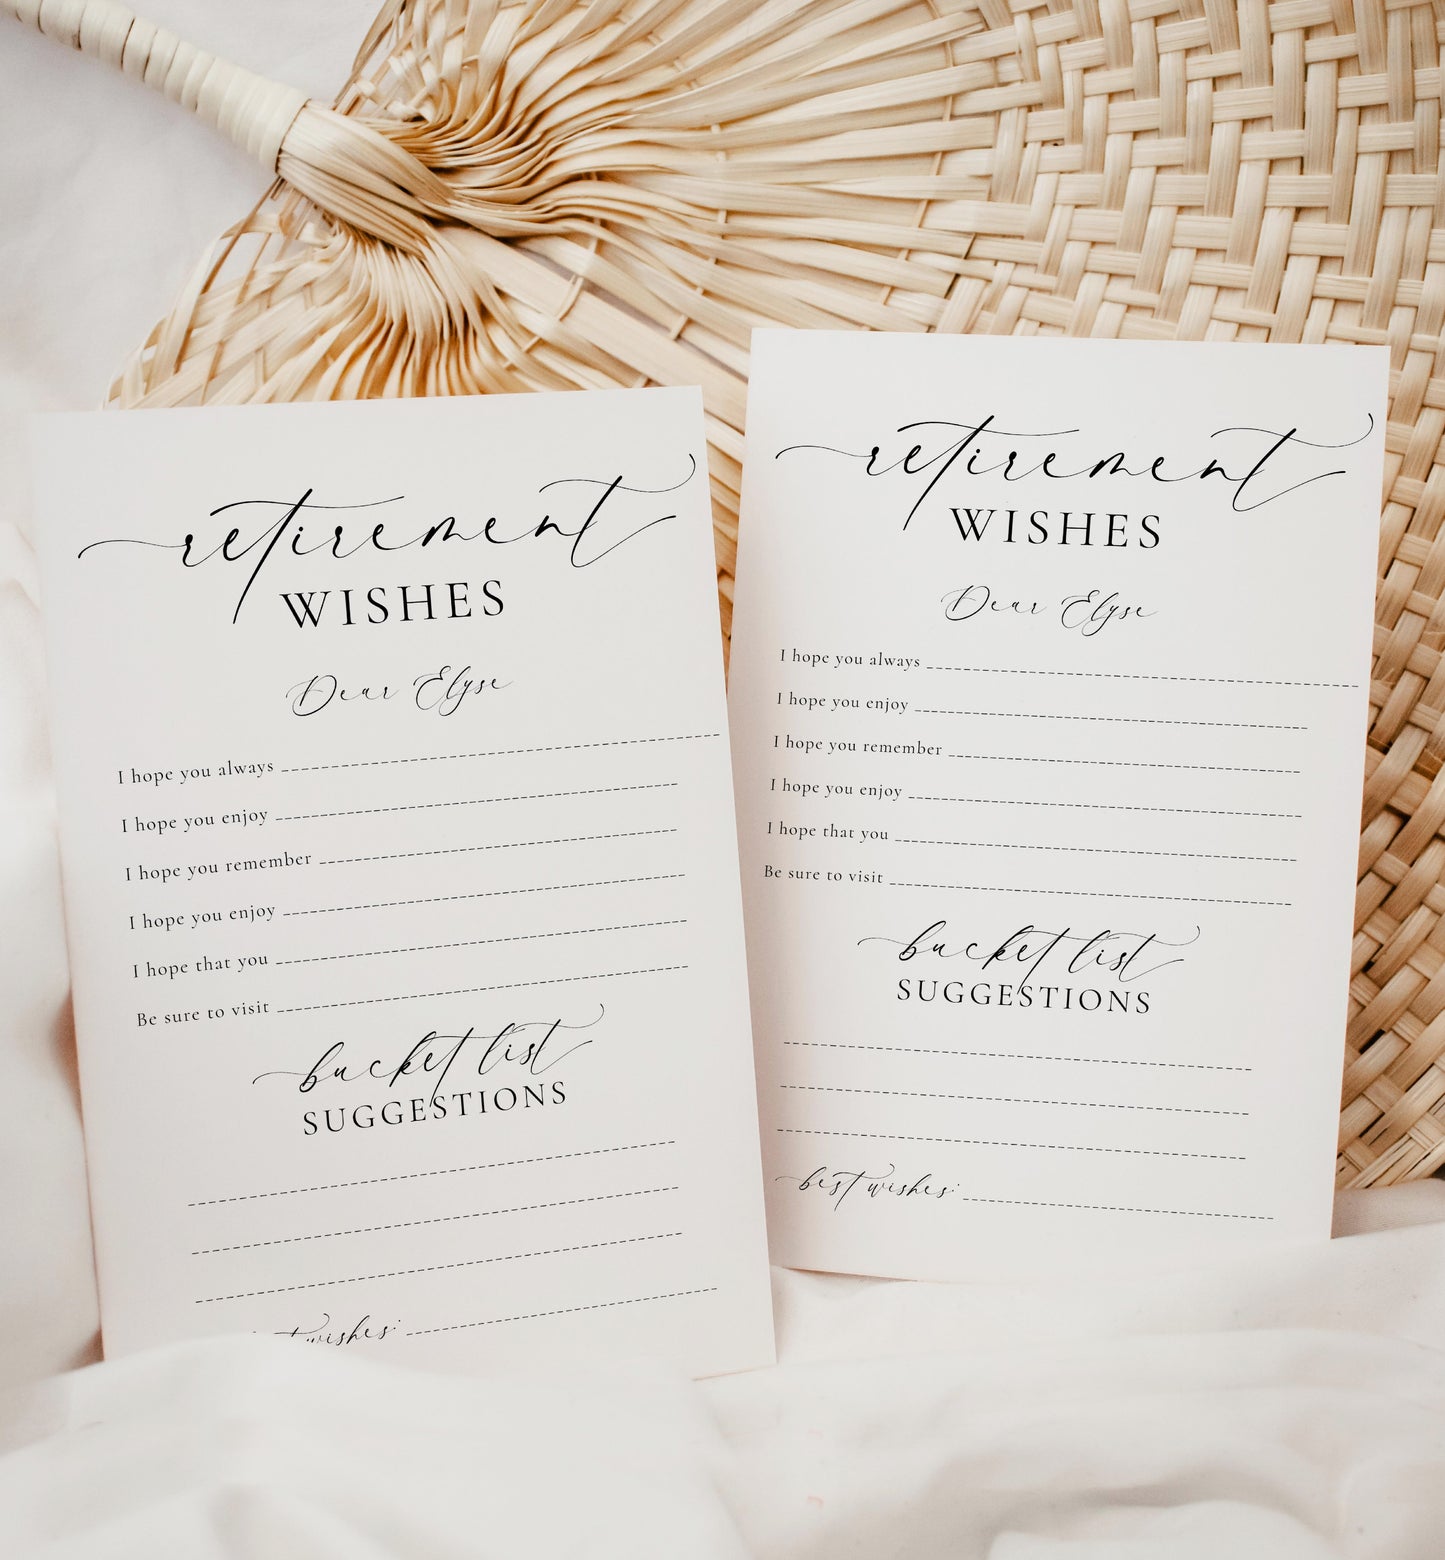 Ellesmere White | Printable Retirement Wishes Card Template